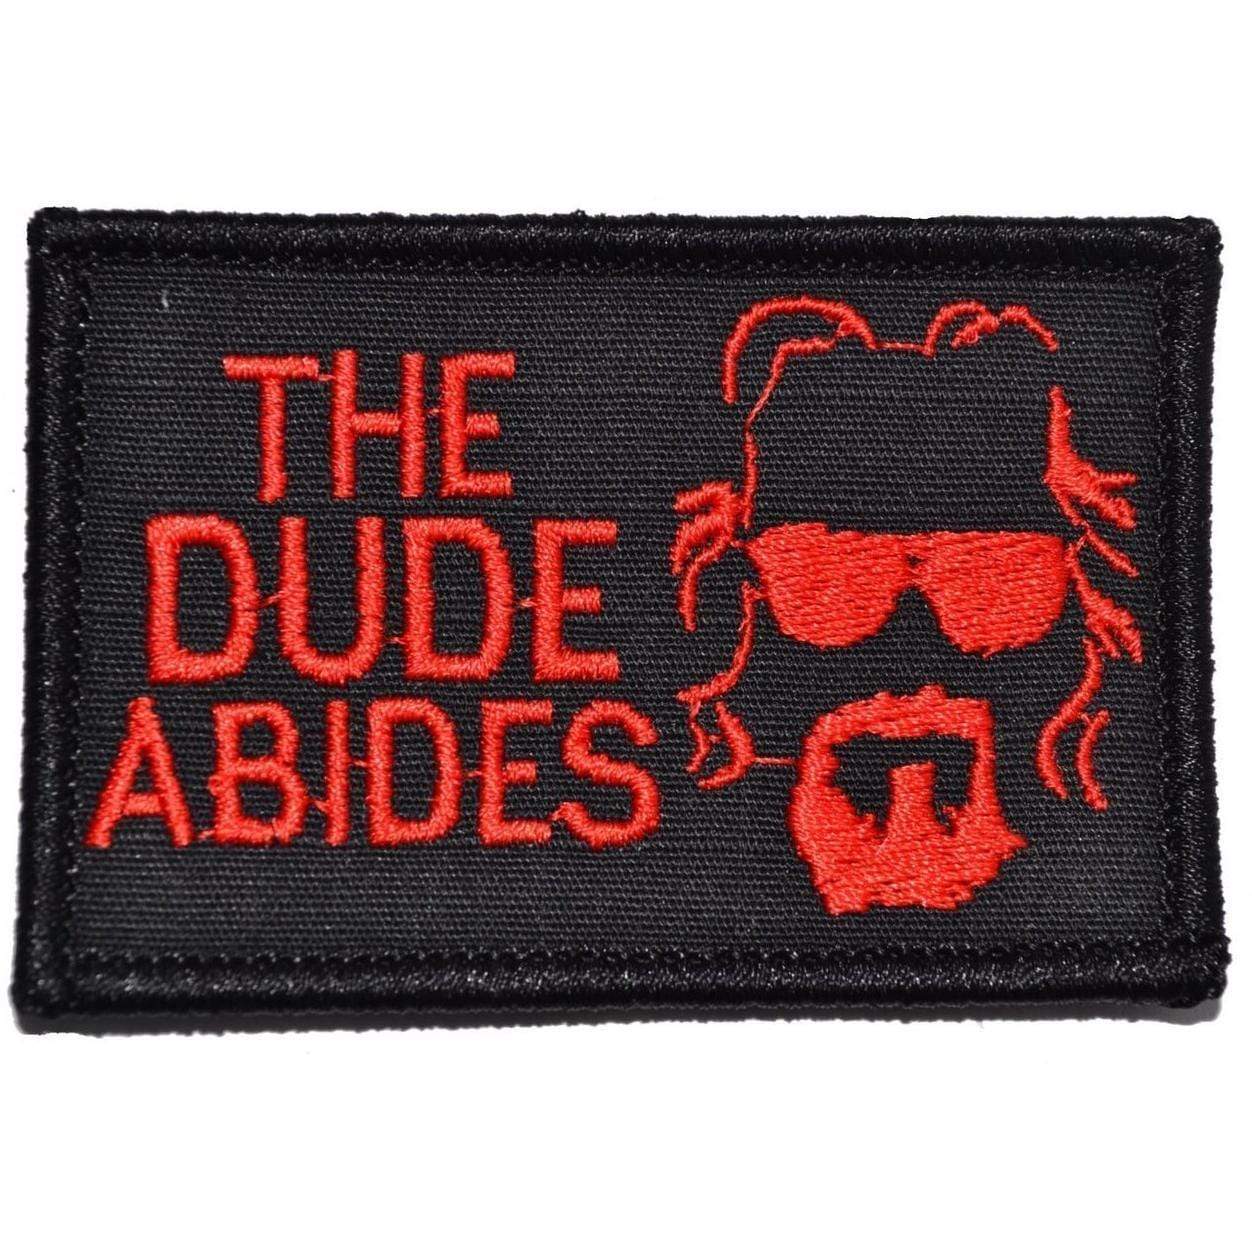 Tactical Gear Junkie Patches Black w/ Red The Dude Abides, The Big Lebowski - 2x3 Patch